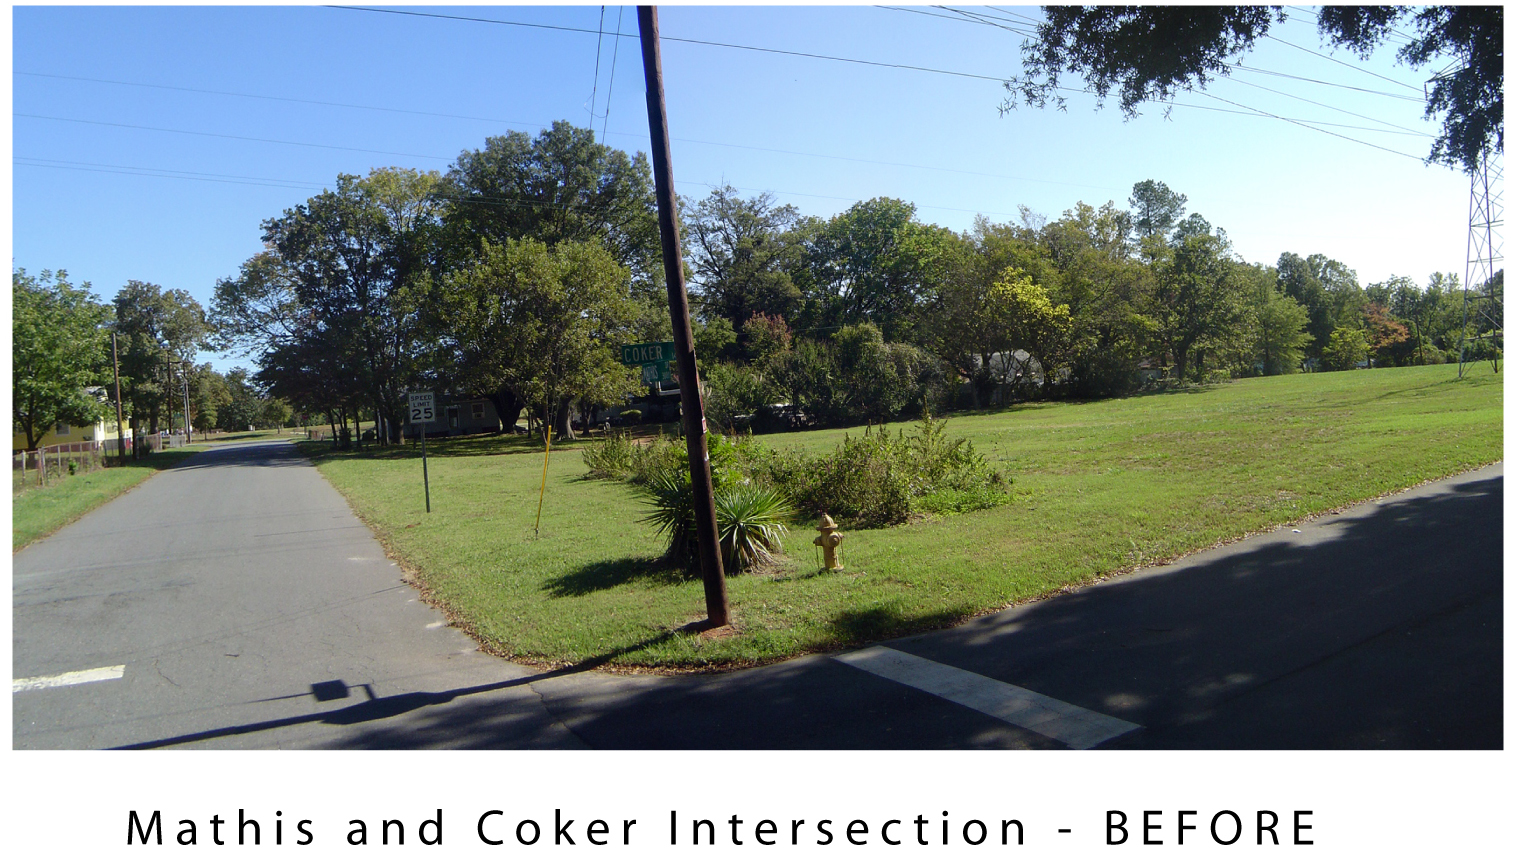 [Mathis+and+Coker+Intersection+Before.jpg]